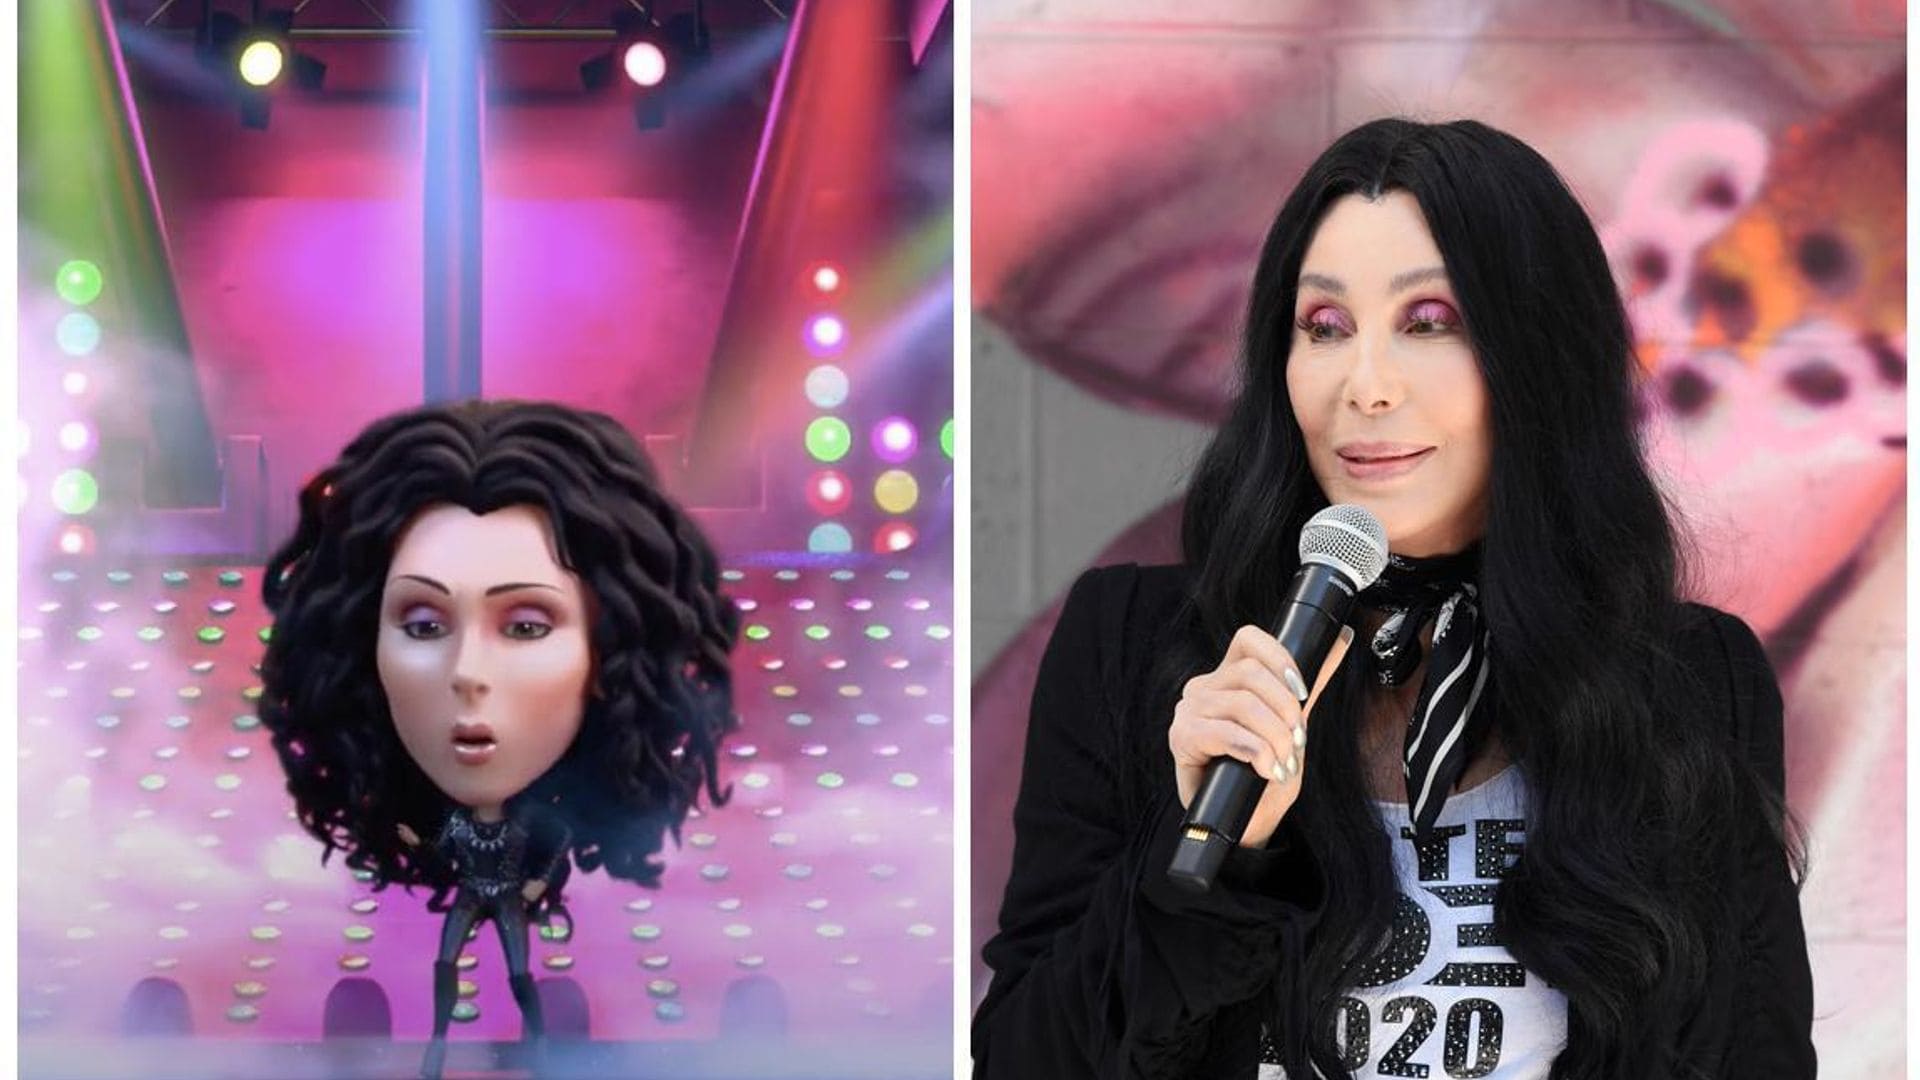 Why Cher struggled playing herself in ‘Bobbleheads: The Movie’